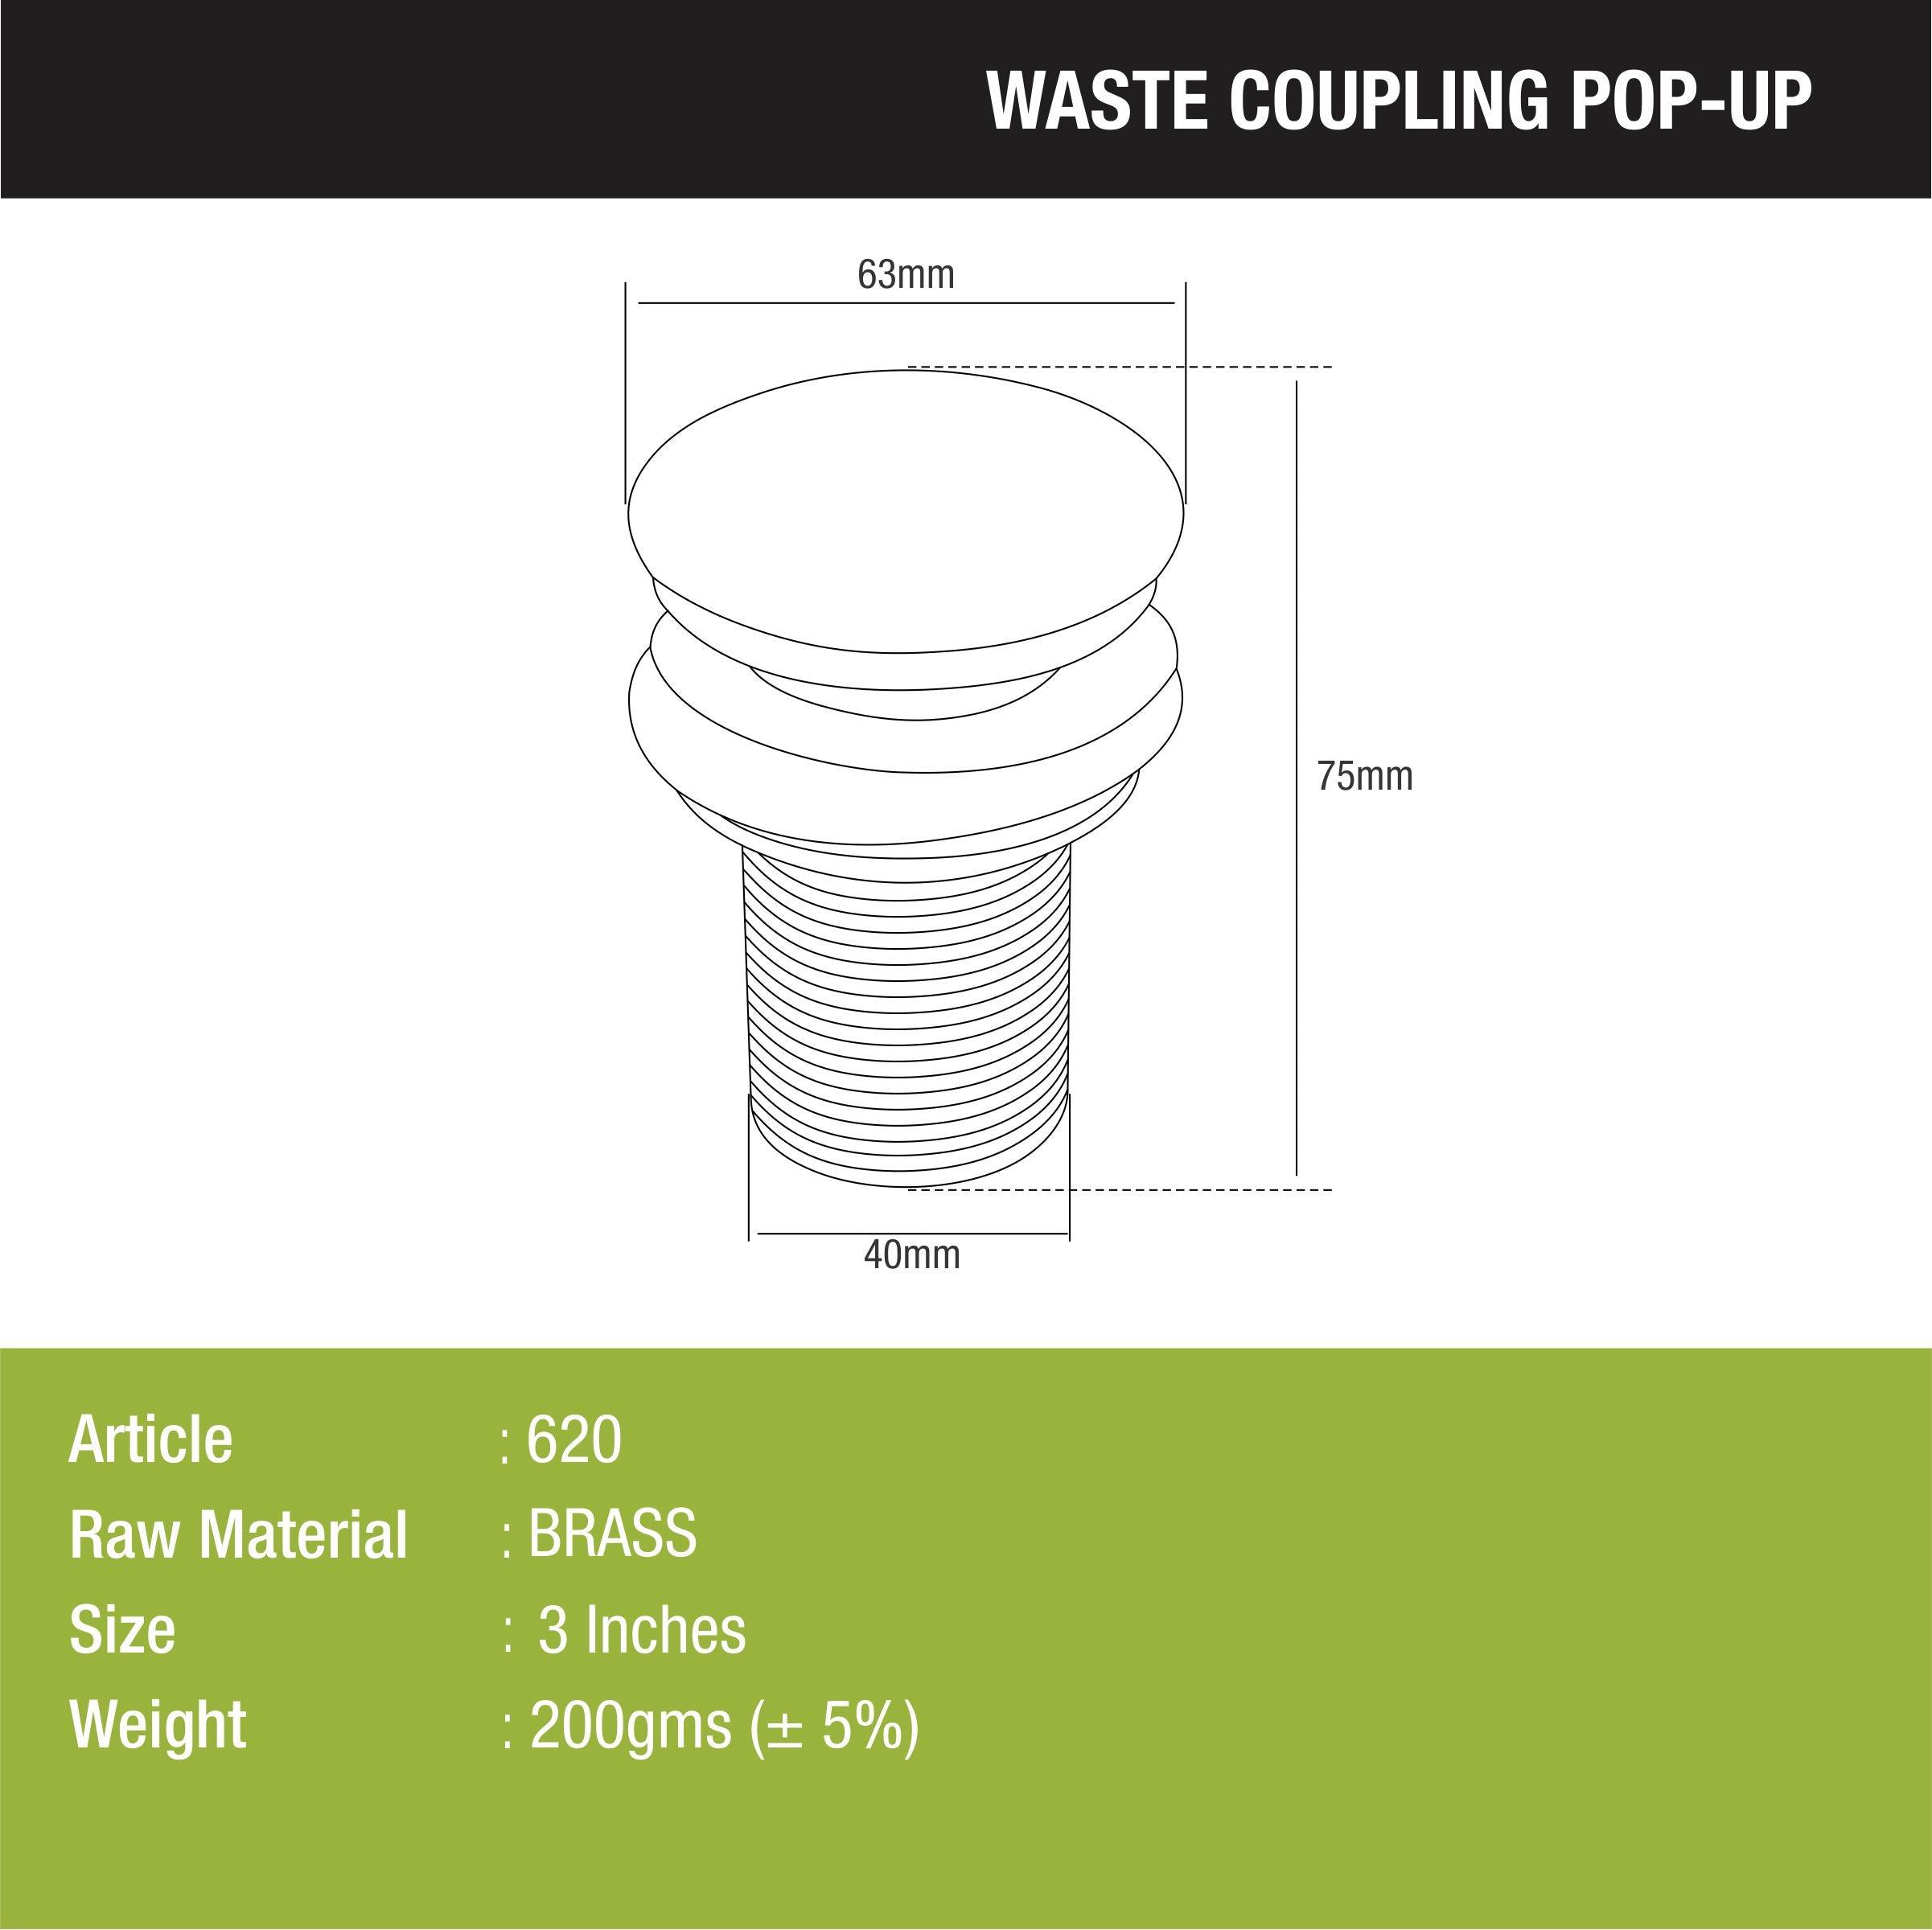 Pop-Up Brass Waste Coupling (3 Inches) sizes and dimensions